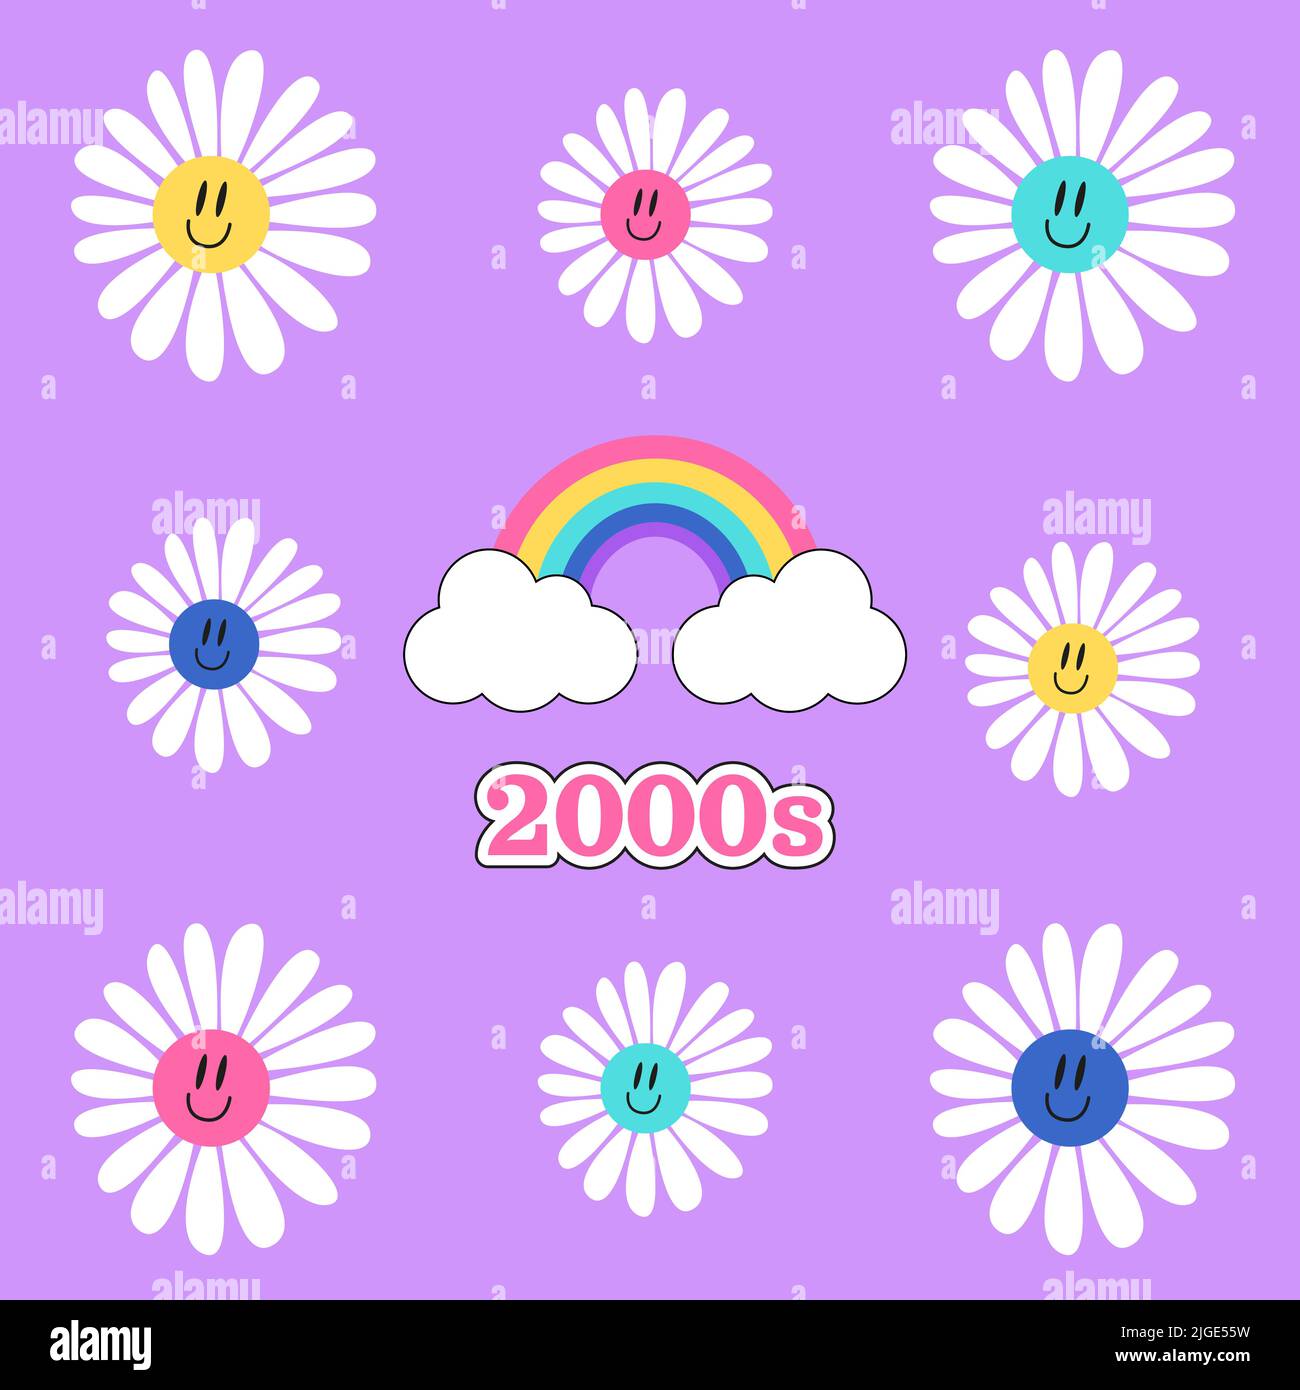 Y2k groovy template. Trippy smiley daisies and colorful rainbow on purple background. 2000s vibes elements. Cartoon sticker, poster, postcard. Psyched Stock Vector